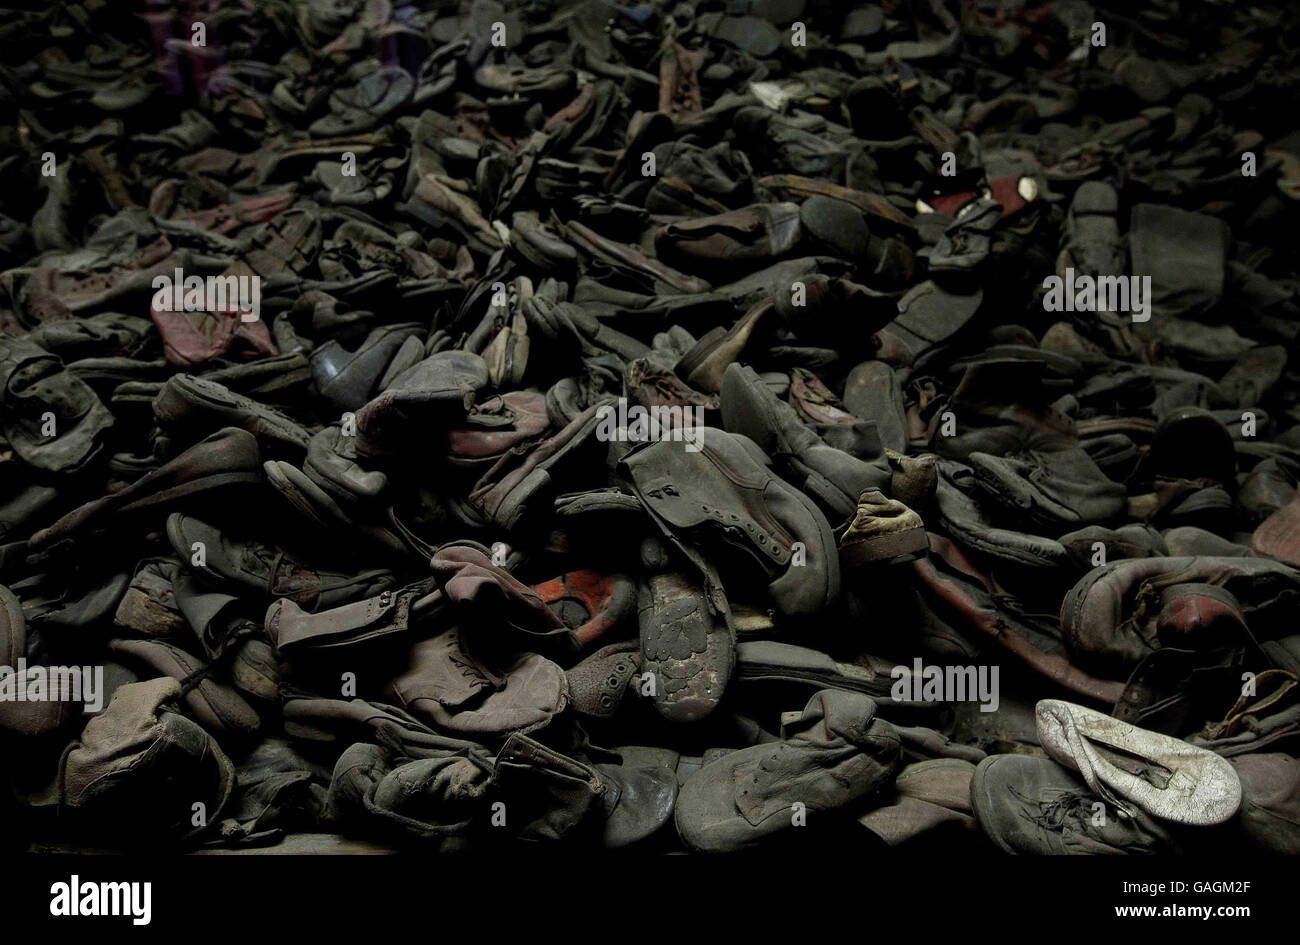 A single child's white shoe stands out amongst around 30 thousand shoes at the former Auschwitz I camp. Sunday January 27th is International Holocaust Memorial Day which marks the date when Auschwitz was liberated. Stock Photo